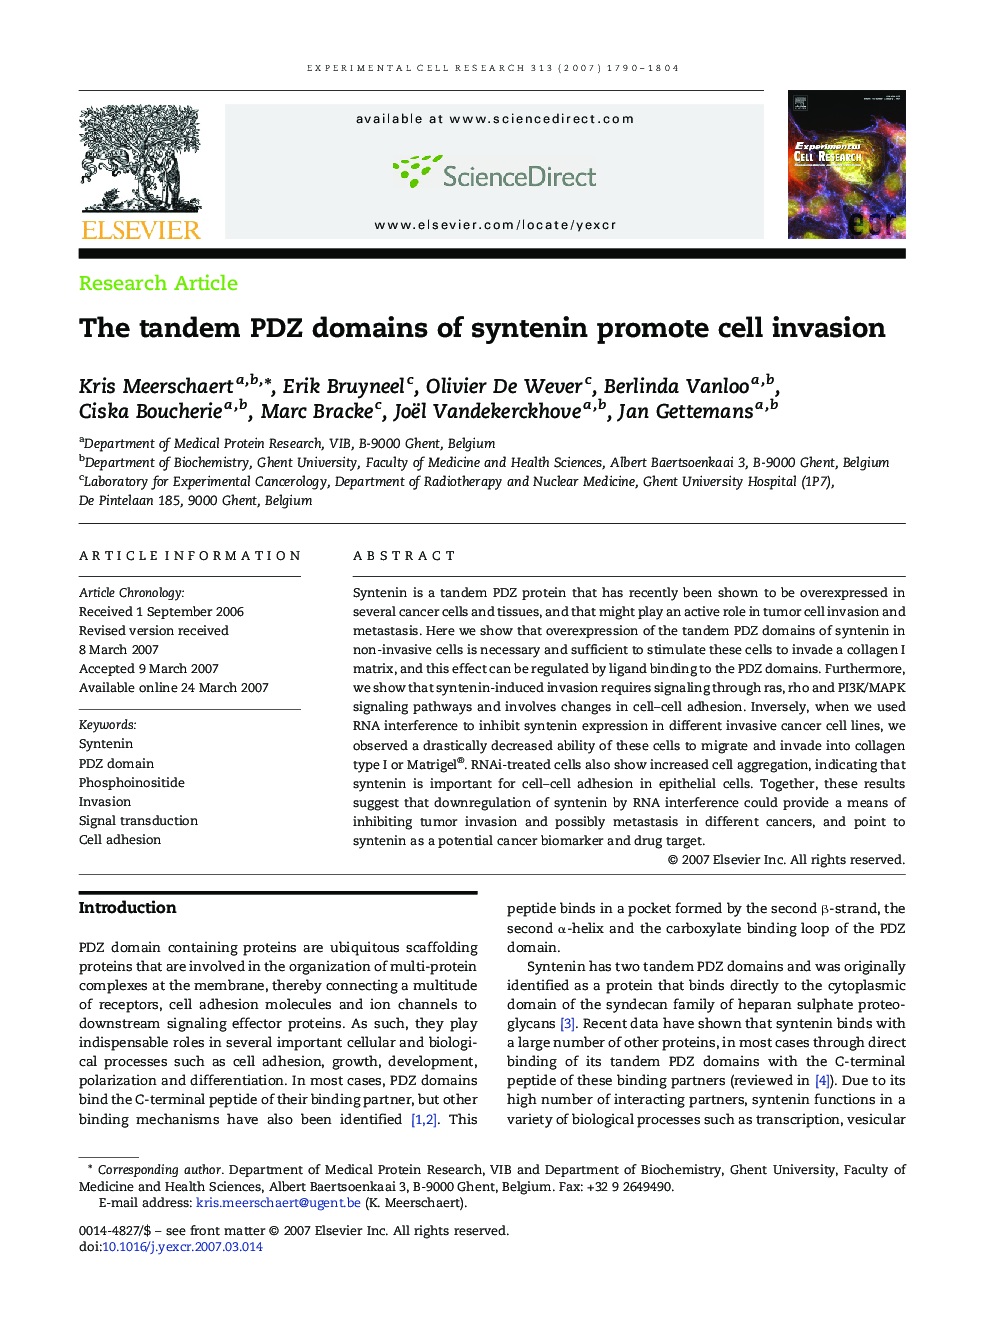 The tandem PDZ domains of syntenin promote cell invasion